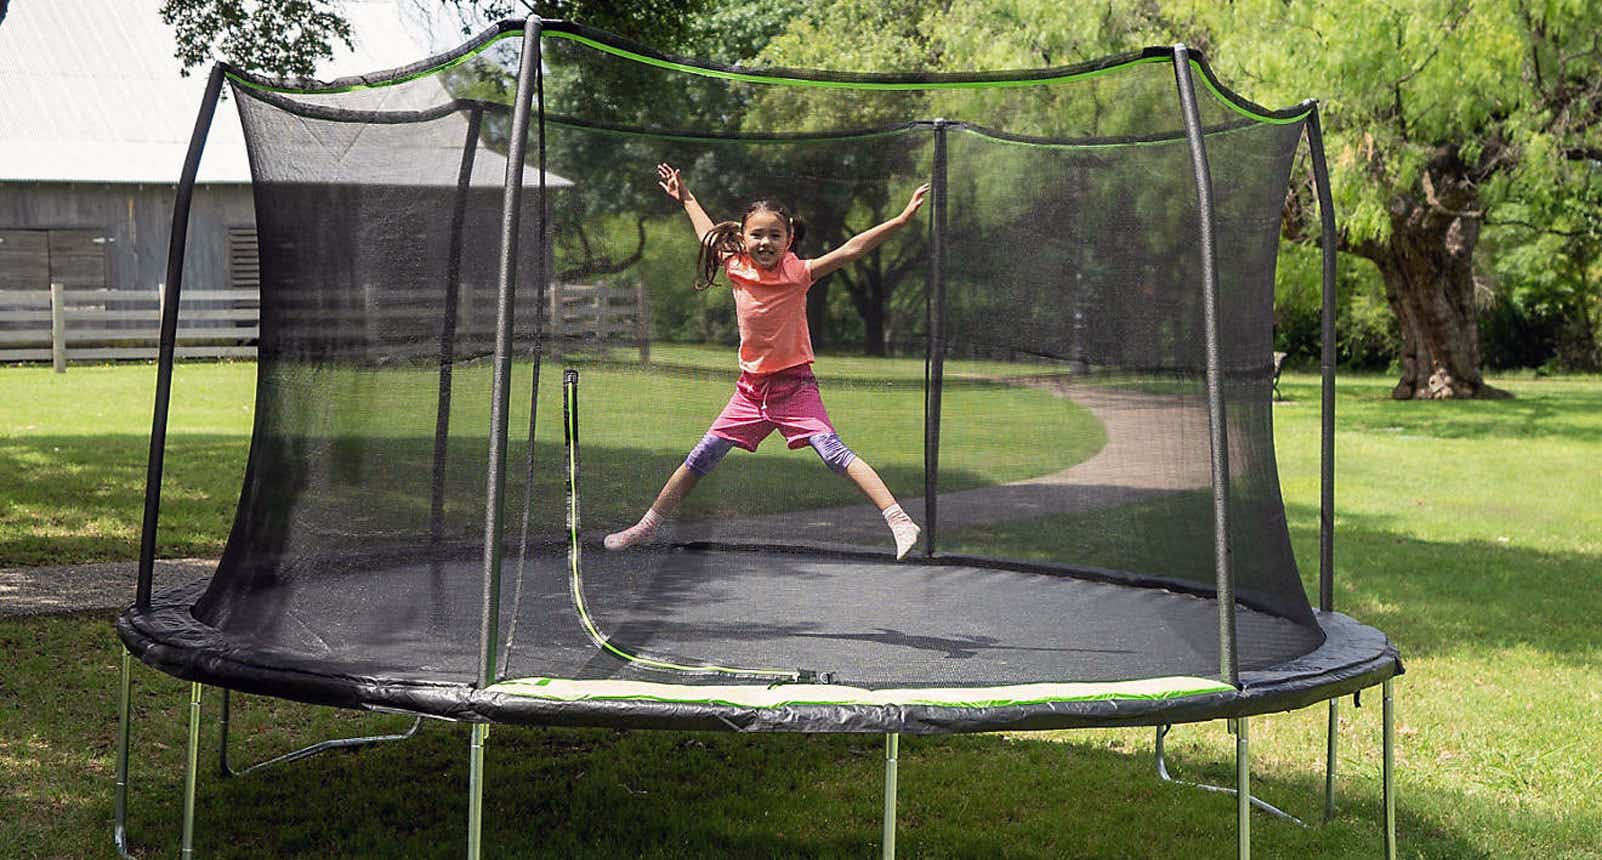 Girl jumping in an outdoor trampoline with safety netting